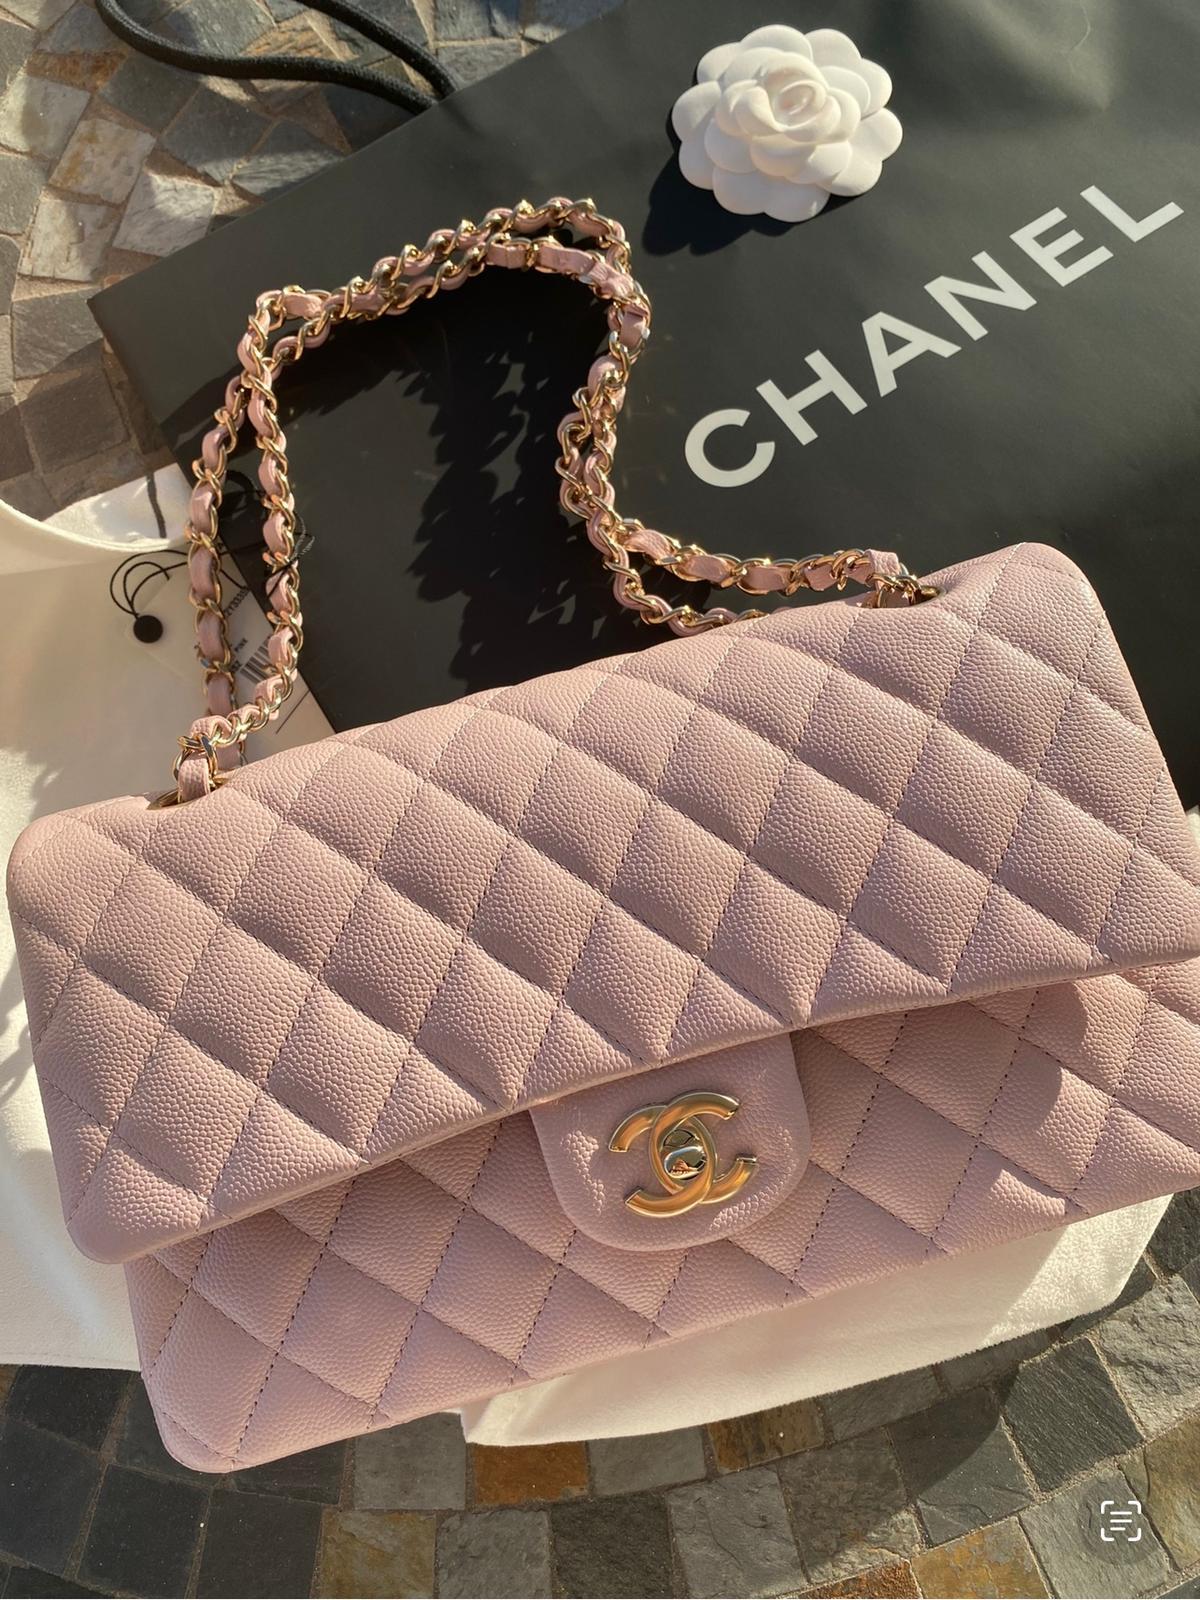 size of chanel classic flap bag small